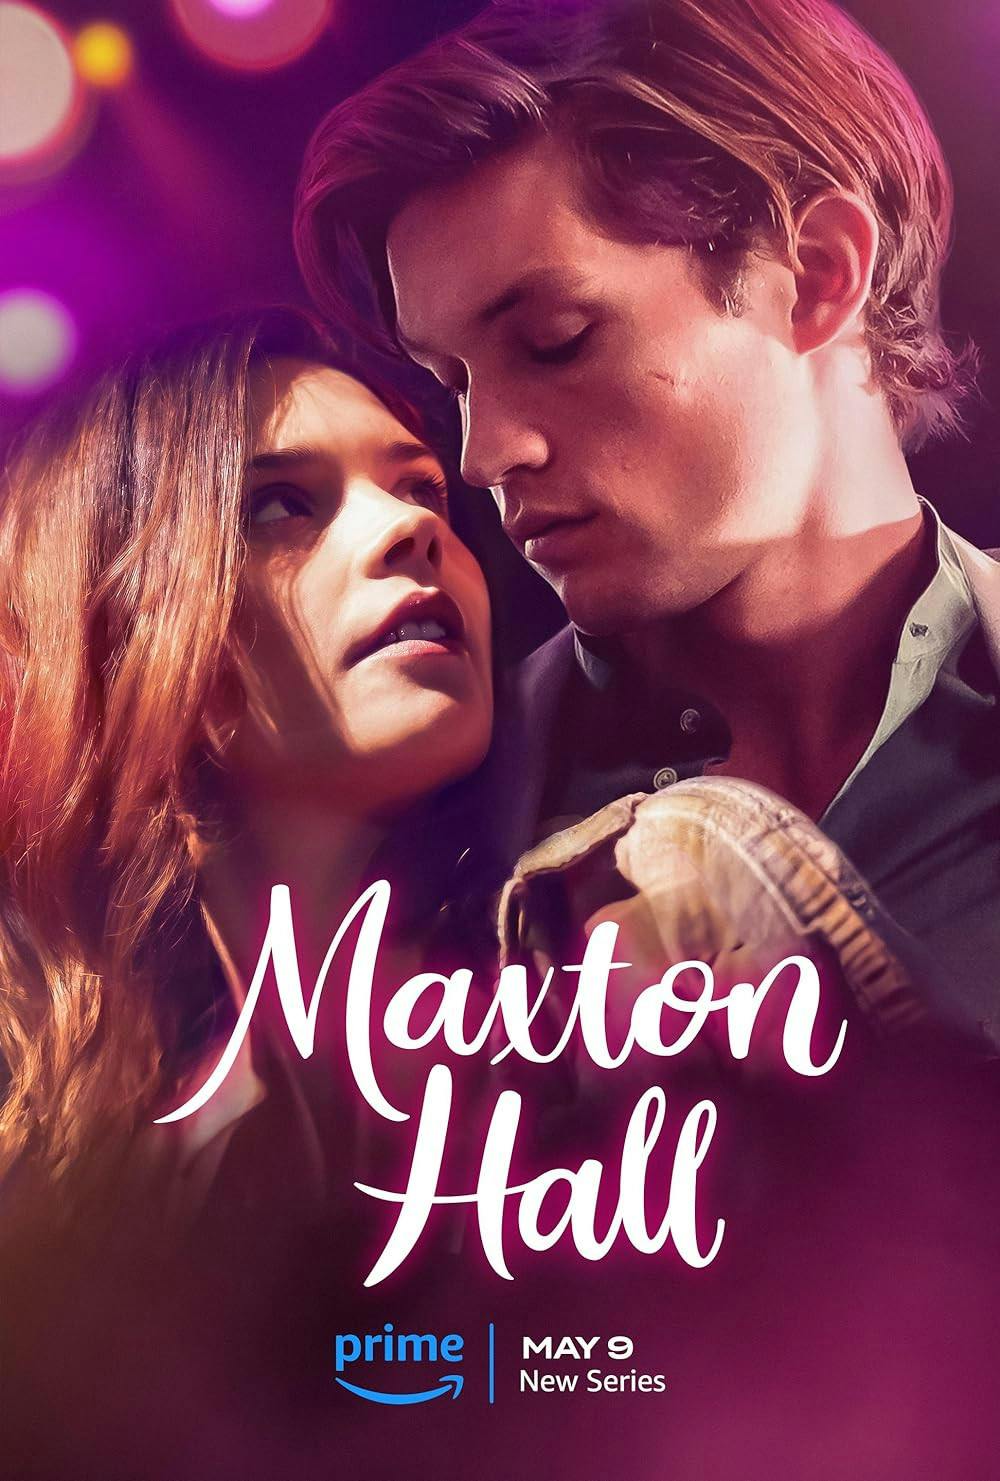 Promotional poster for "Maxton Hall" on Amazon Prime.